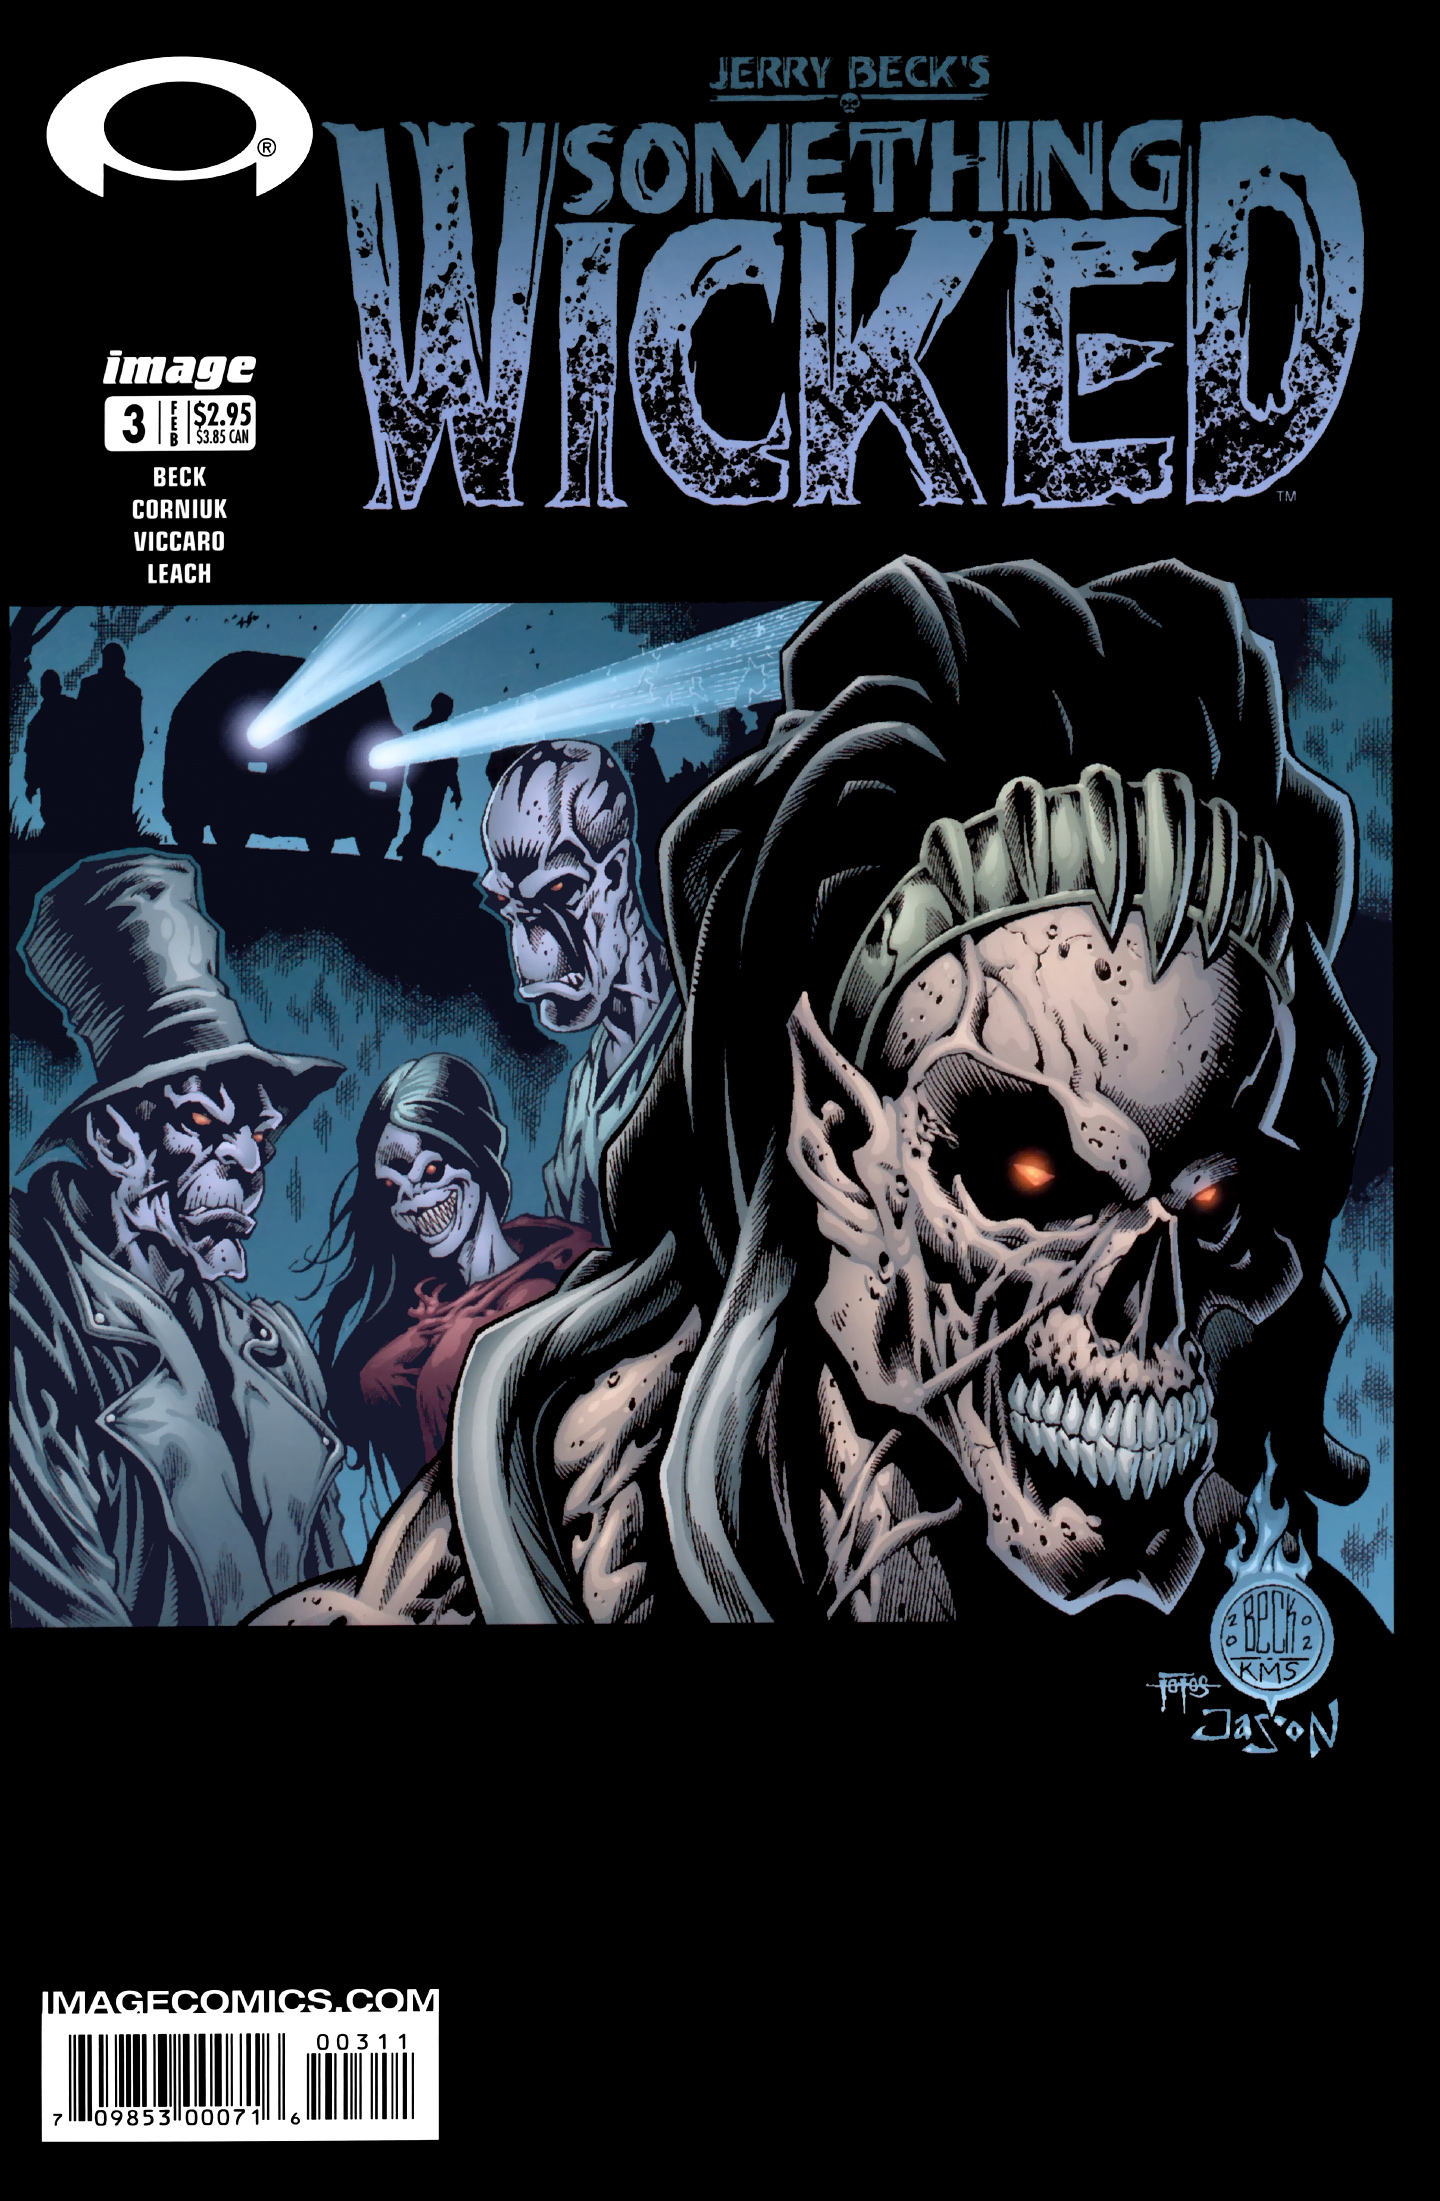 Read online Something Wicked comic -  Issue #3 - 1